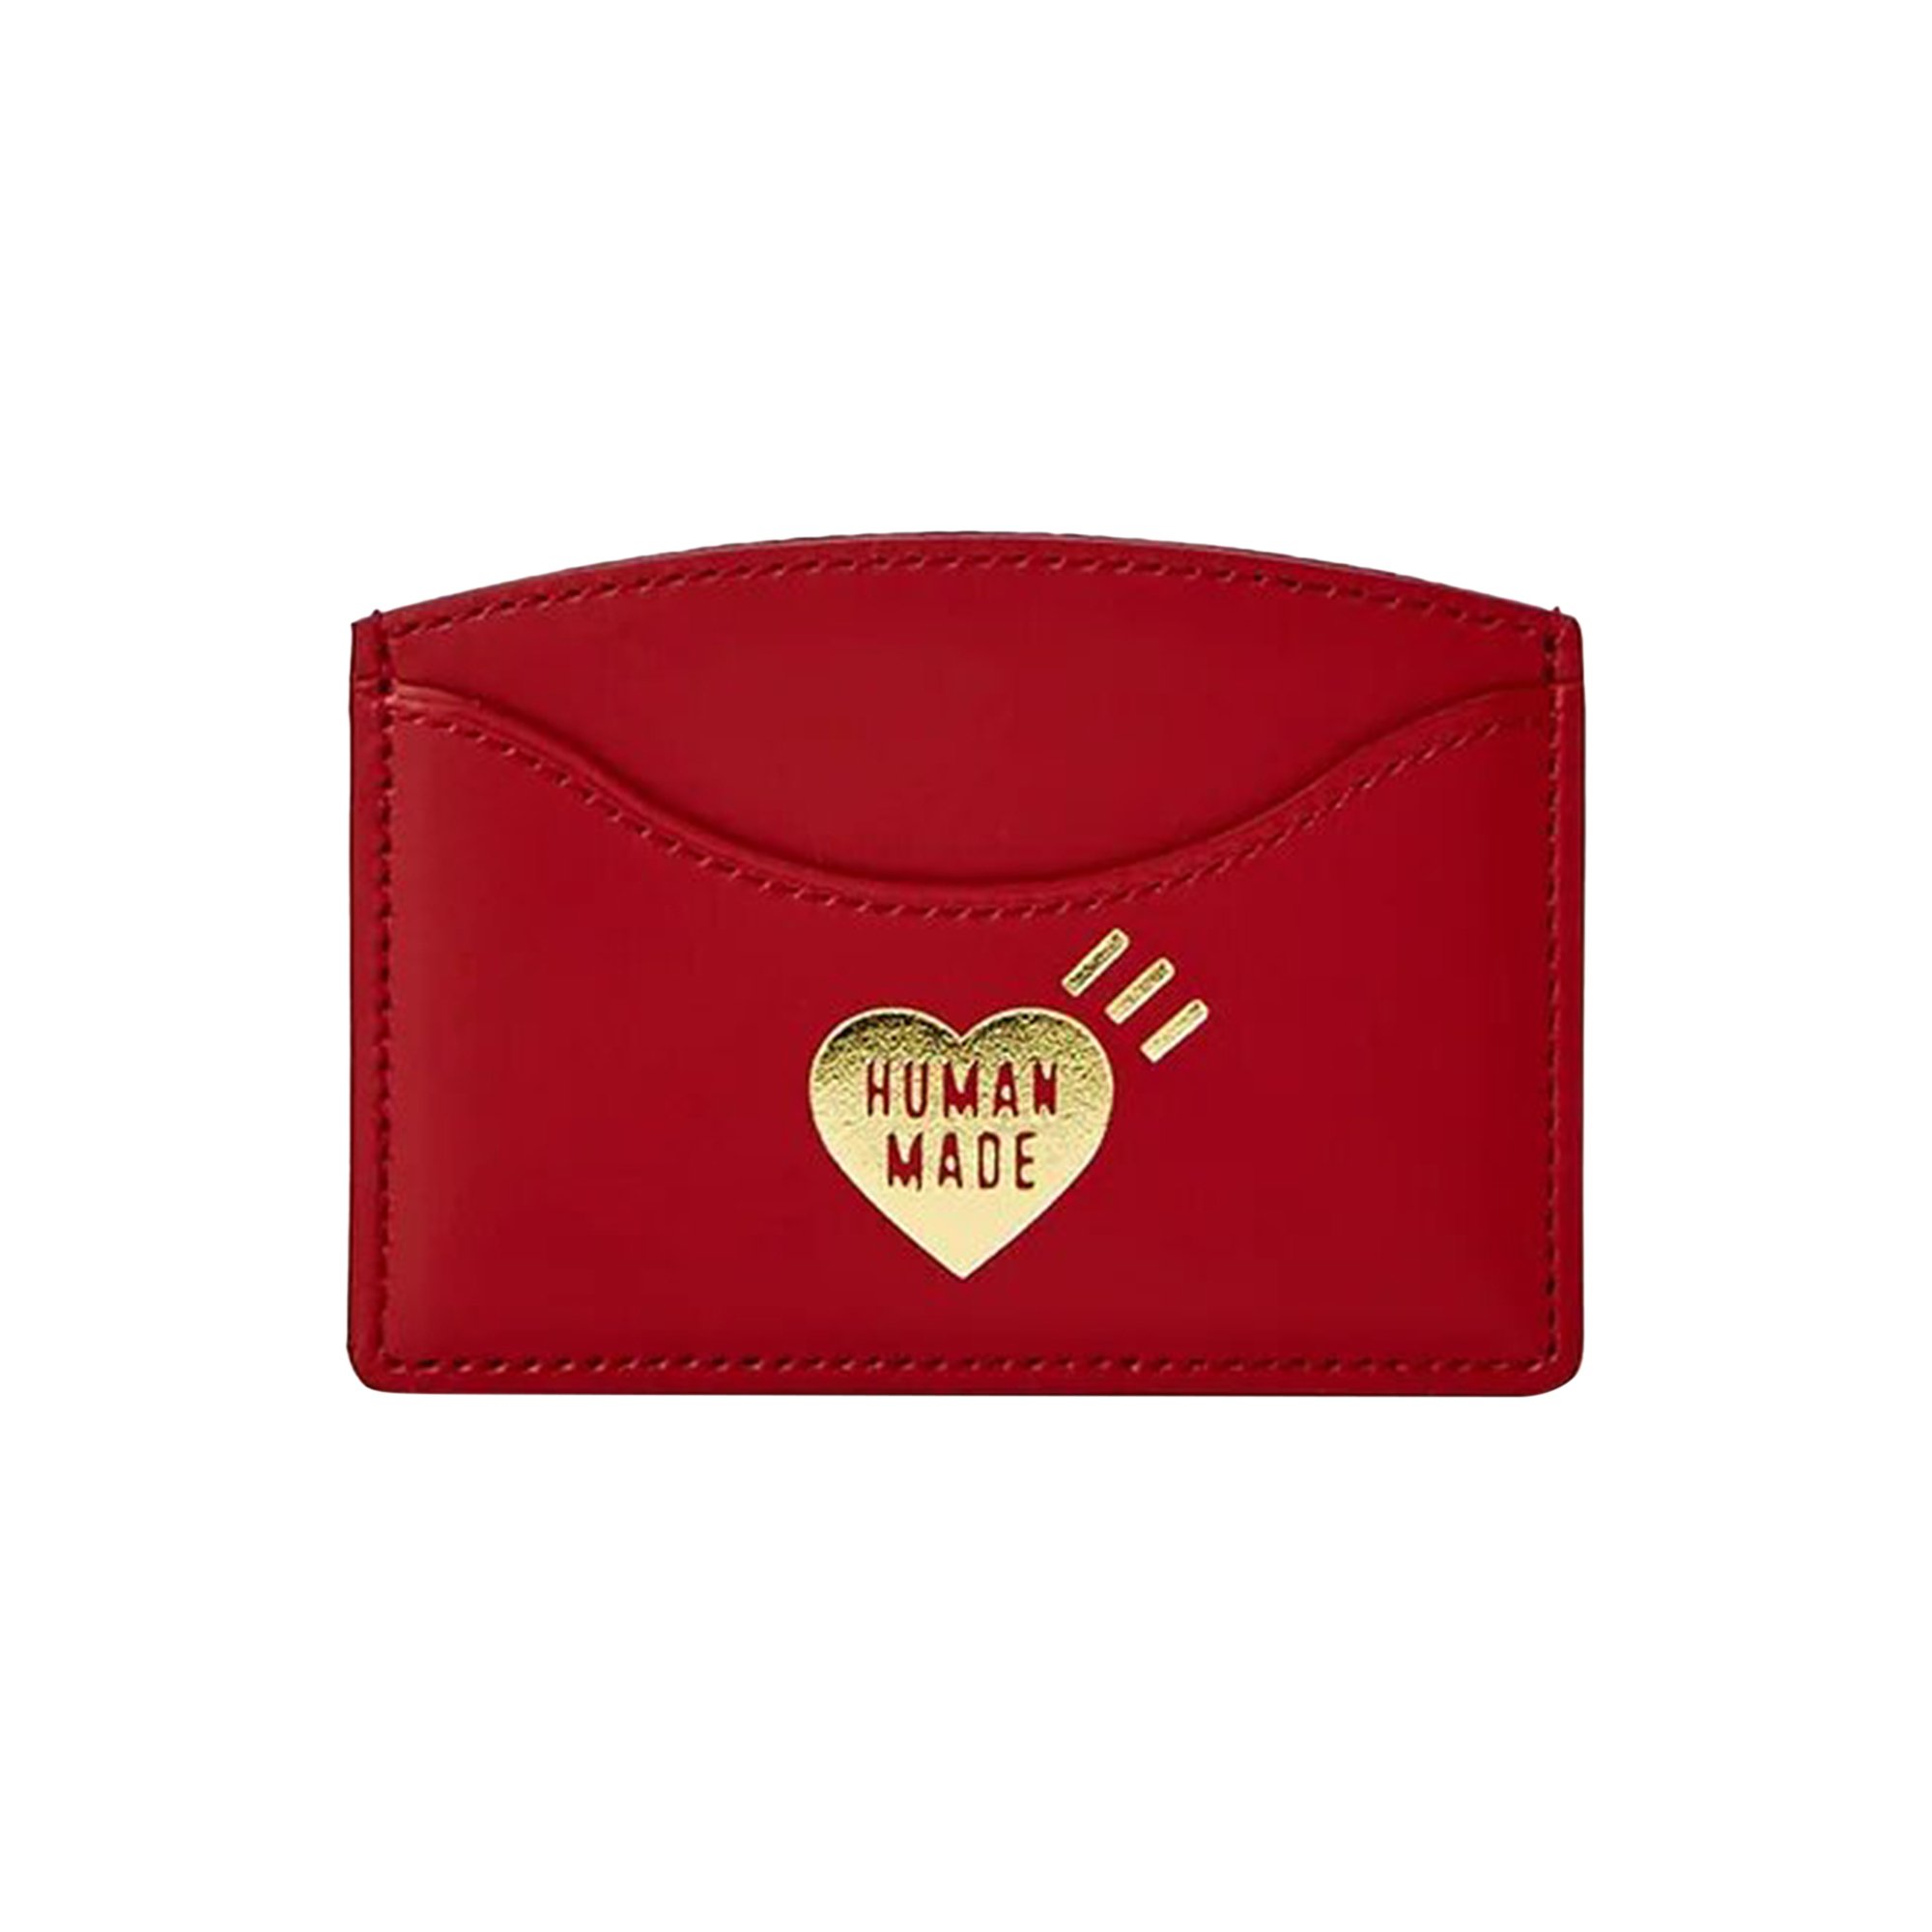 Buy Human Made Leather Card Case 'Red' - HM25GD060 RED | GOAT CA